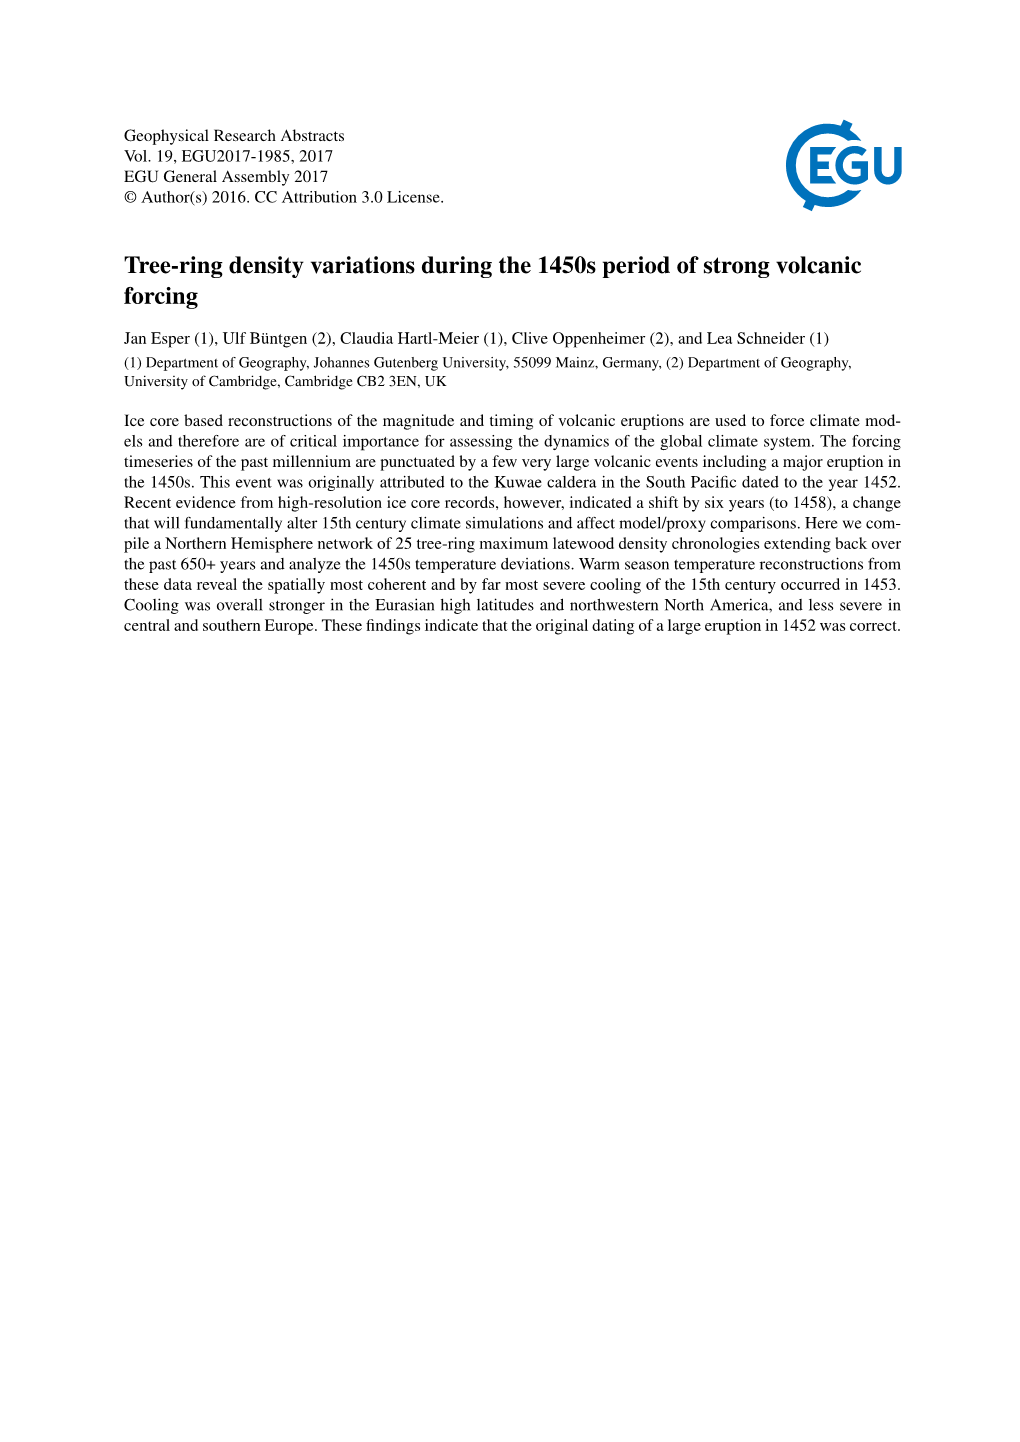 Tree-Ring Density Variations During the 1450S Period of Strong Volcanic Forcing